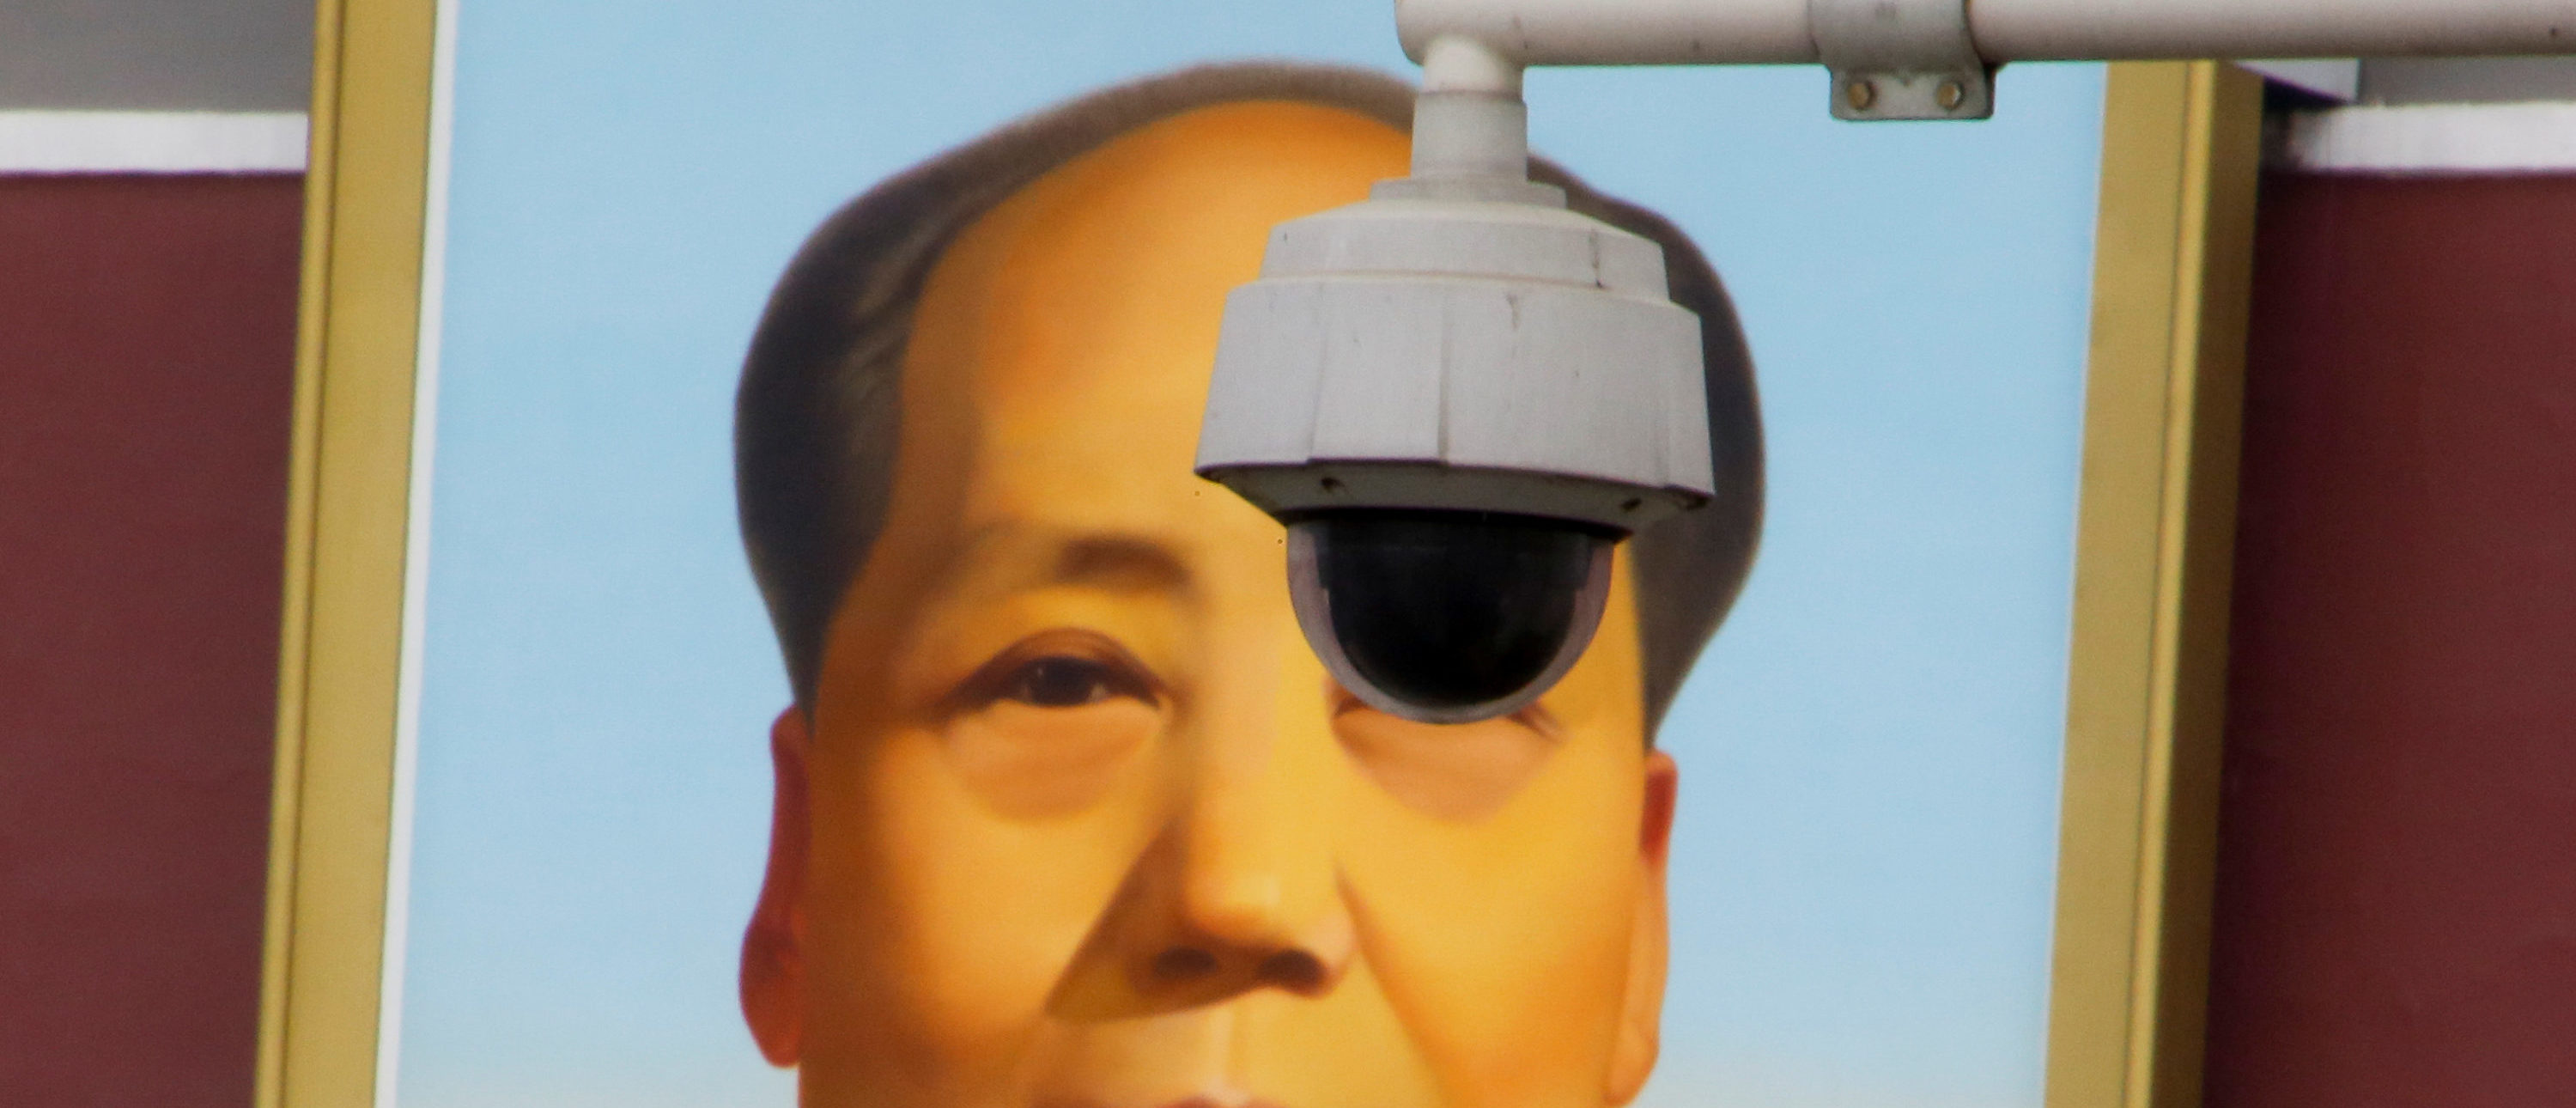 Here’s How Impeachment Obsession Is Allowing Big Tech To Build A China-Like Surveillance State